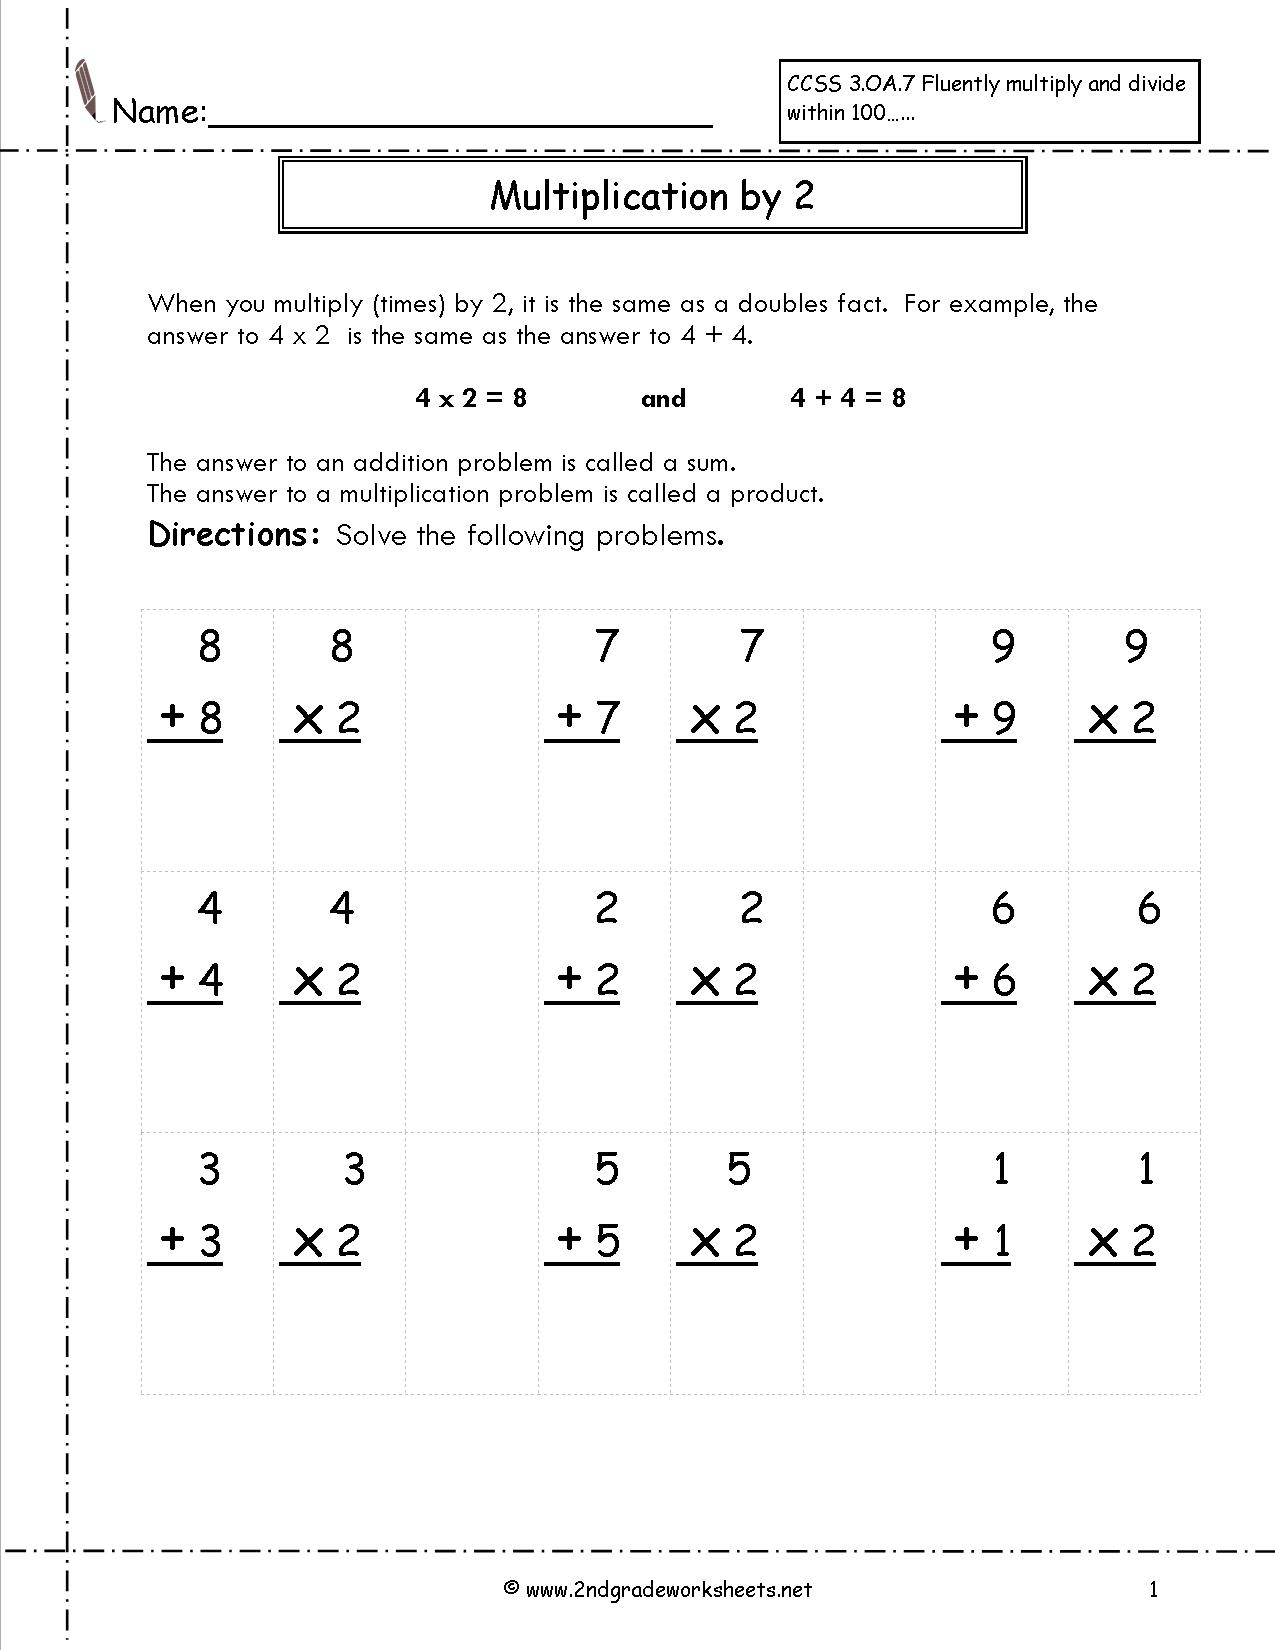 Multiplication Worksheets And Printouts within Multiplication Worksheets 2S